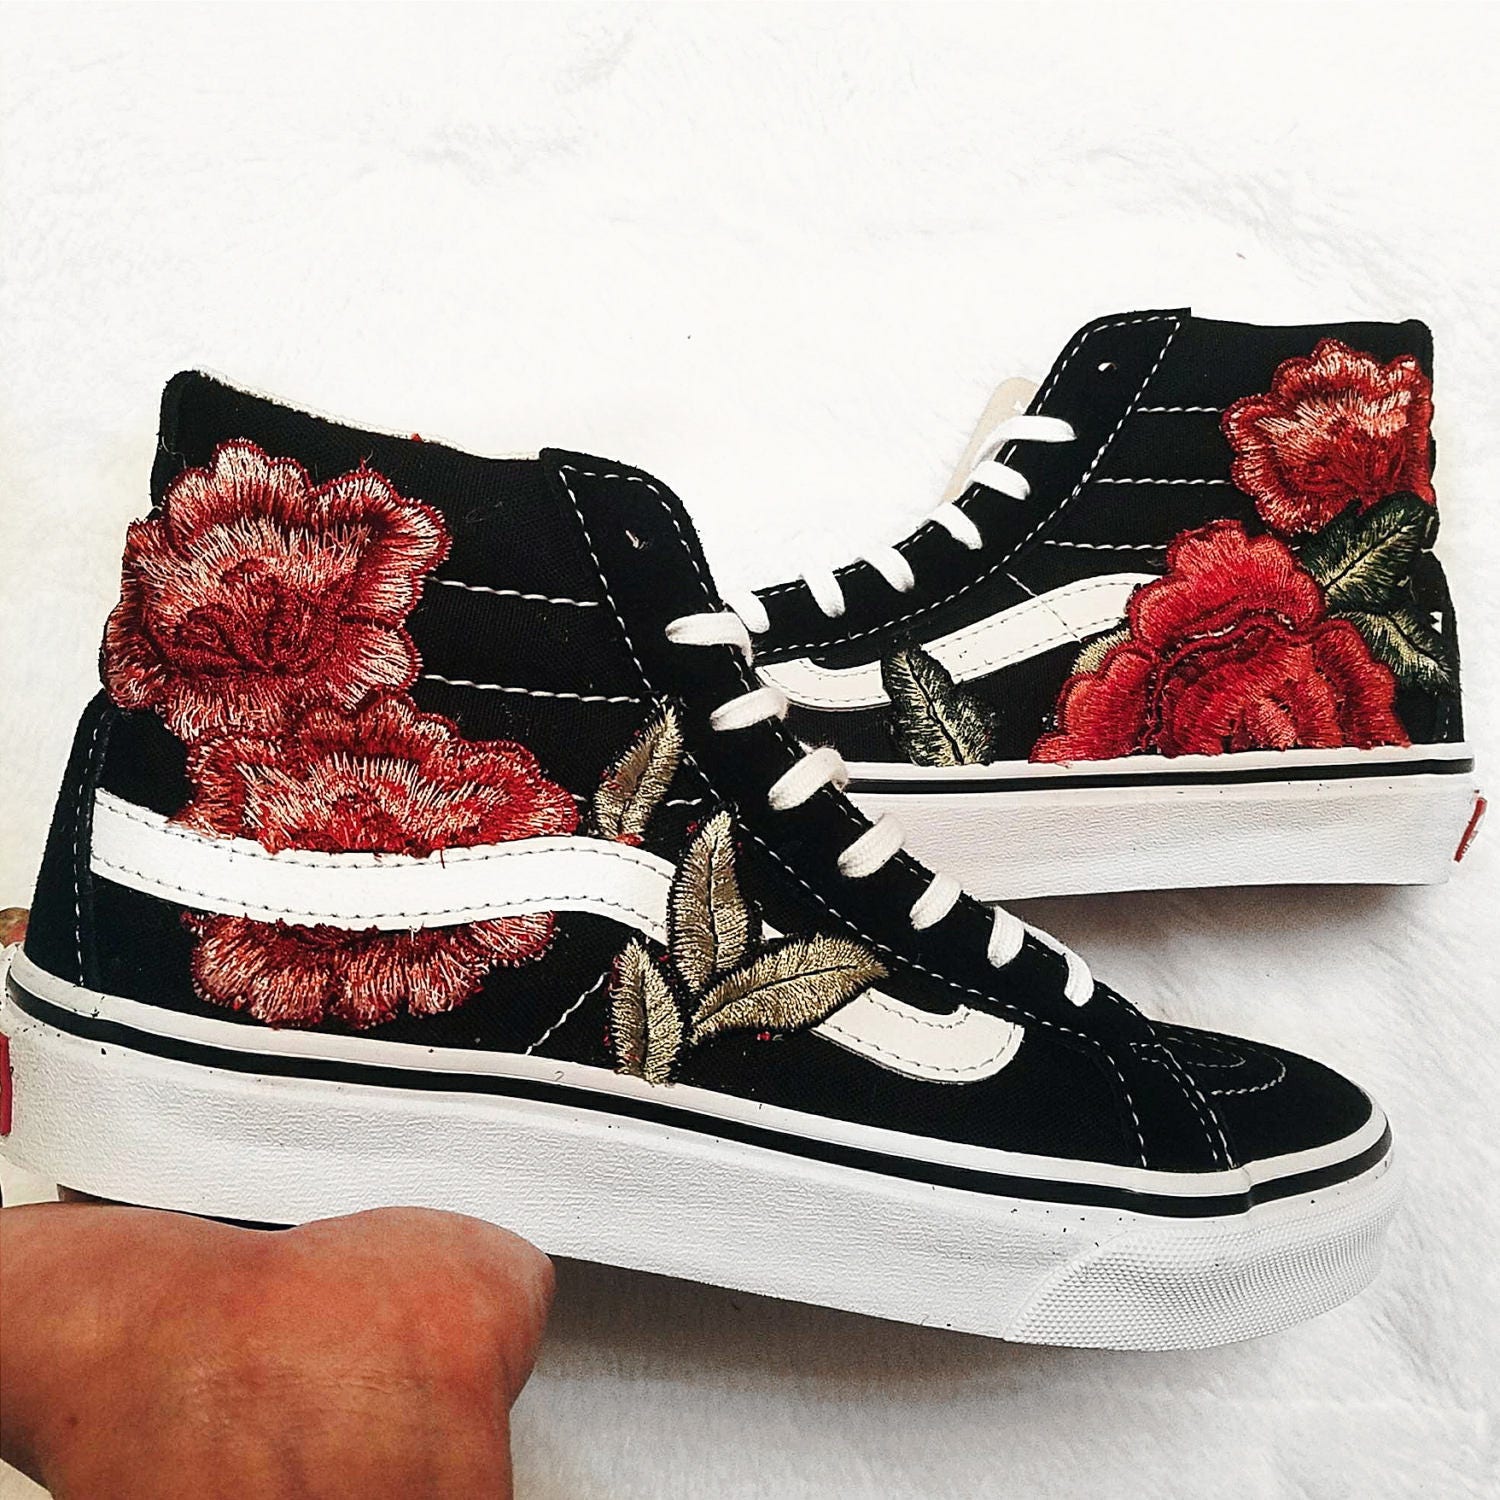 vans high tops with roses